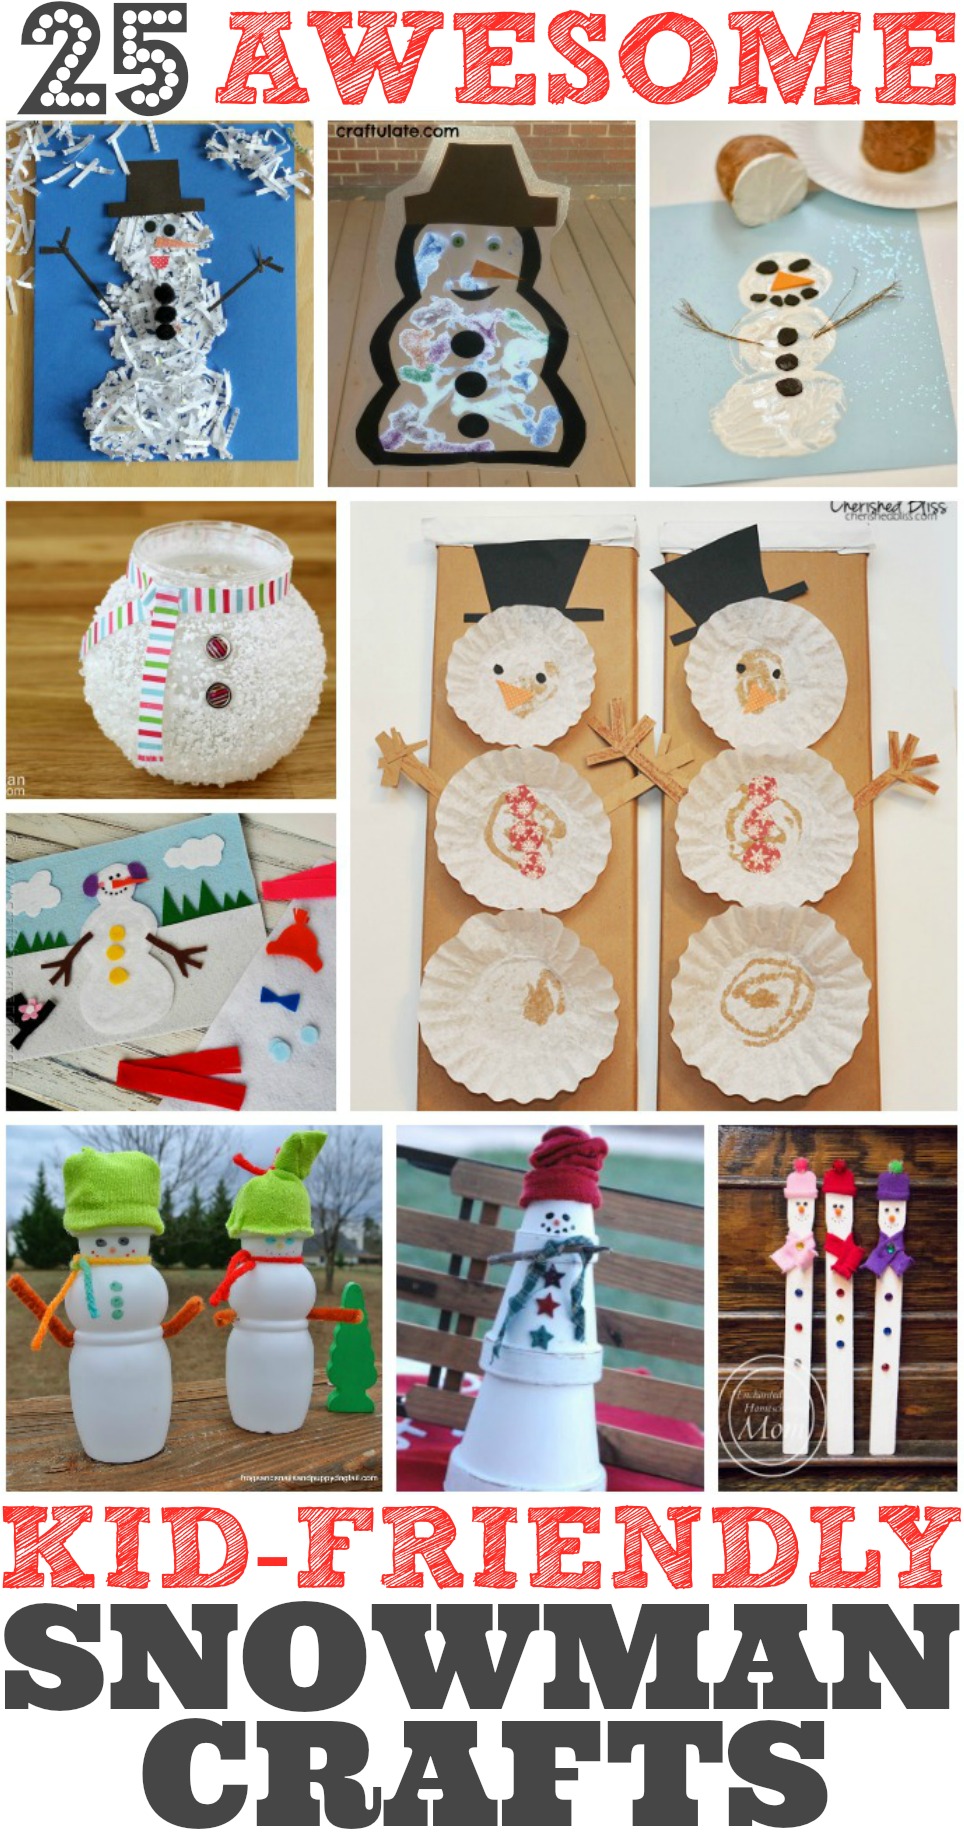 25 Simple Button Crafts and Art Projects - Craftulate